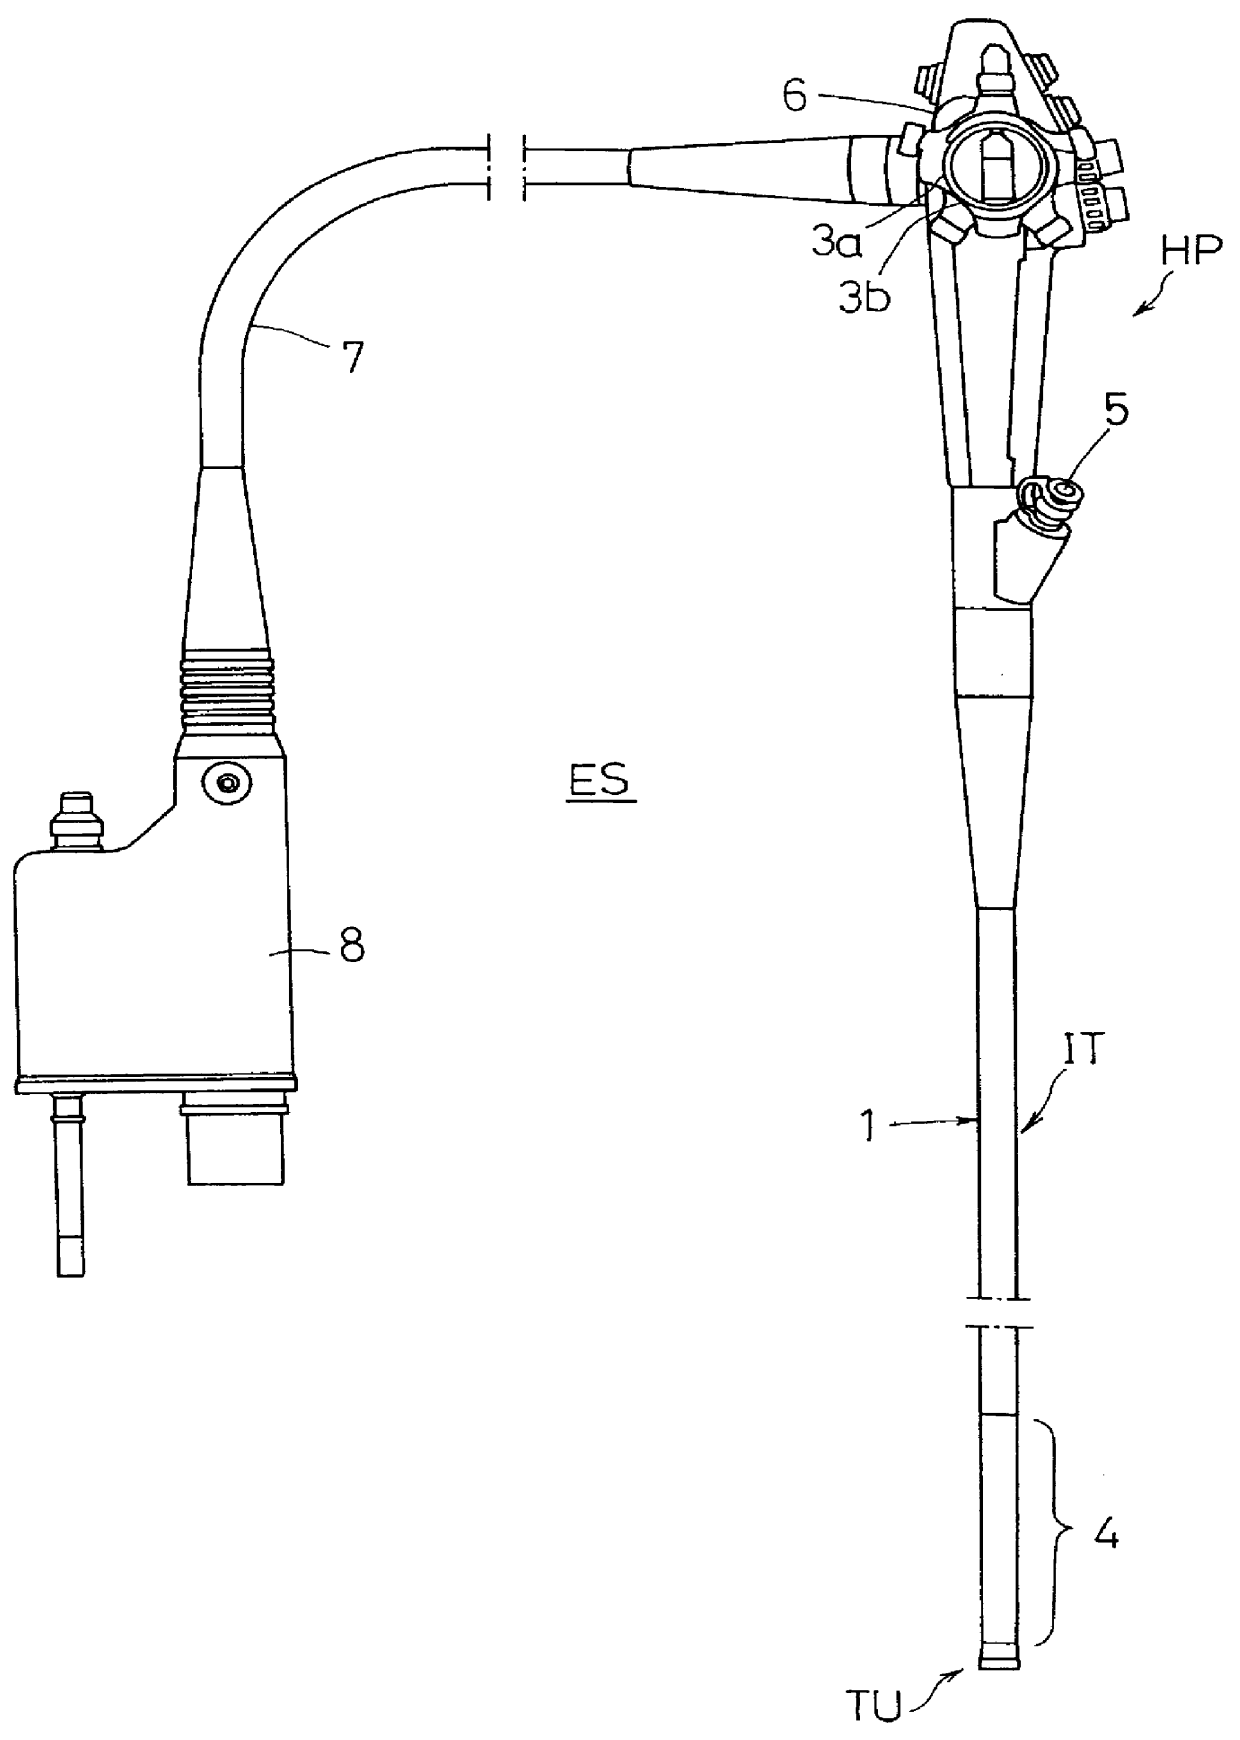 Endoscope with movable imaging unit for zooming or focusing